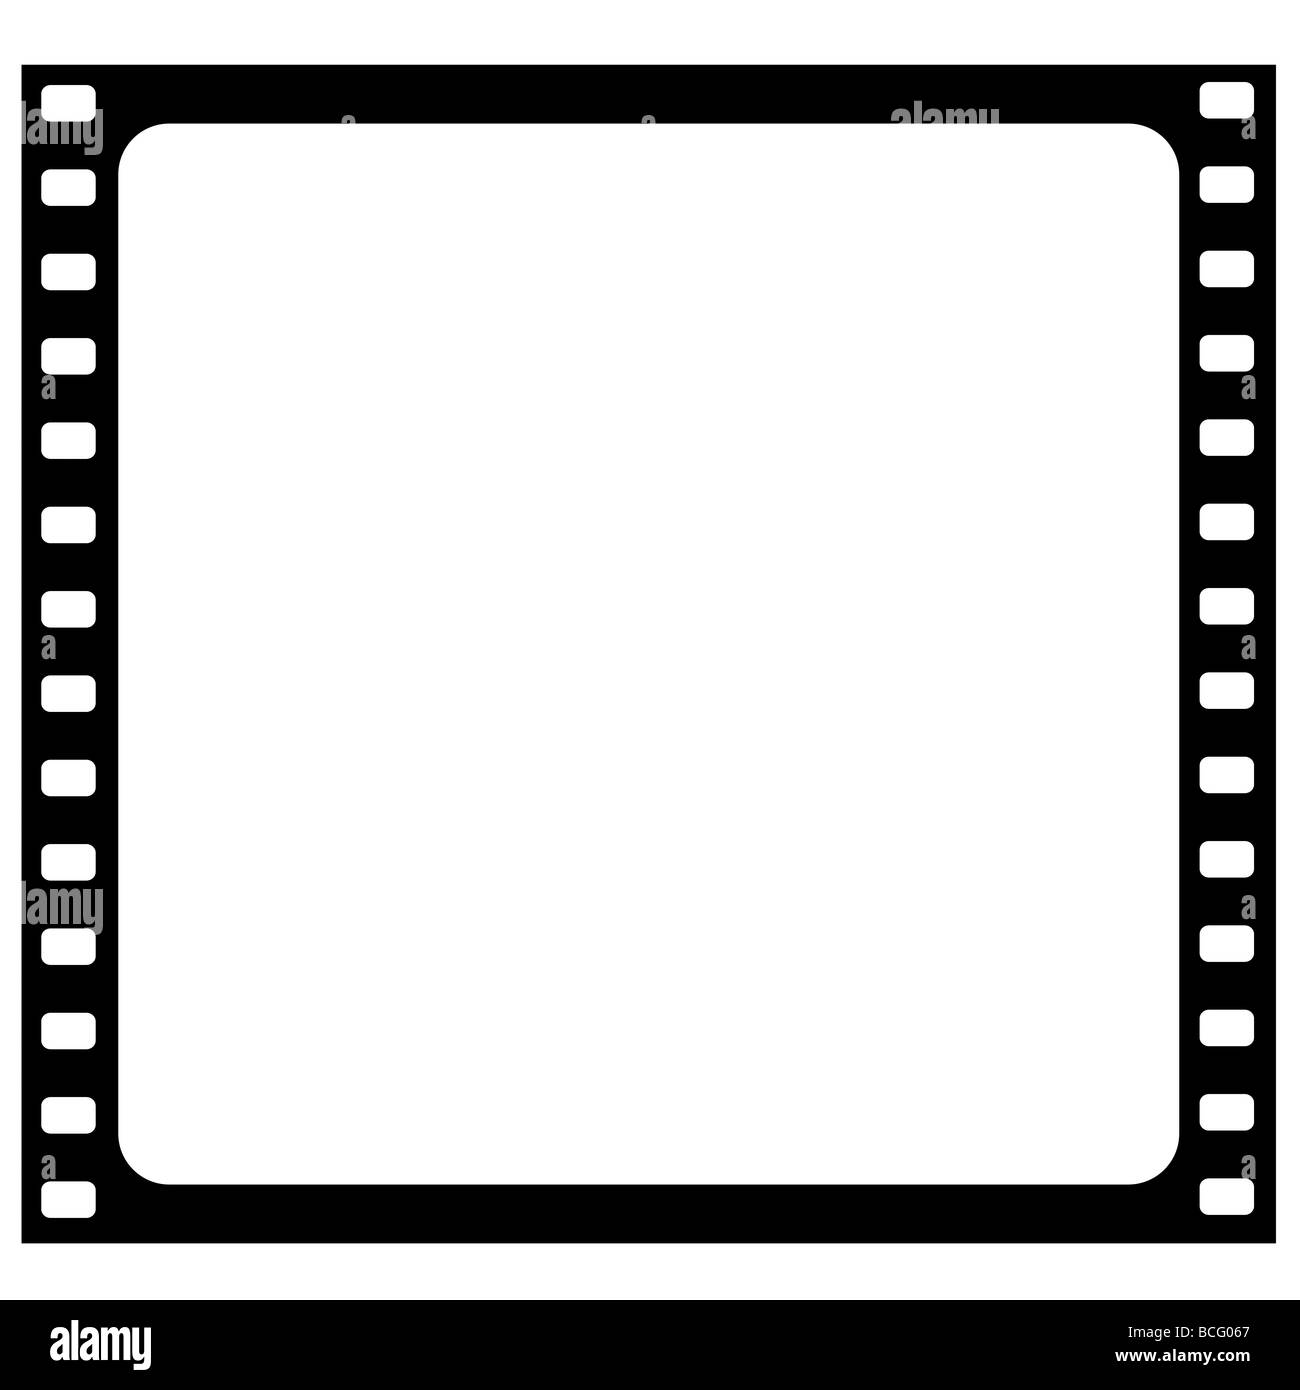 35mm analog film strip frame isolated png Stock Photo